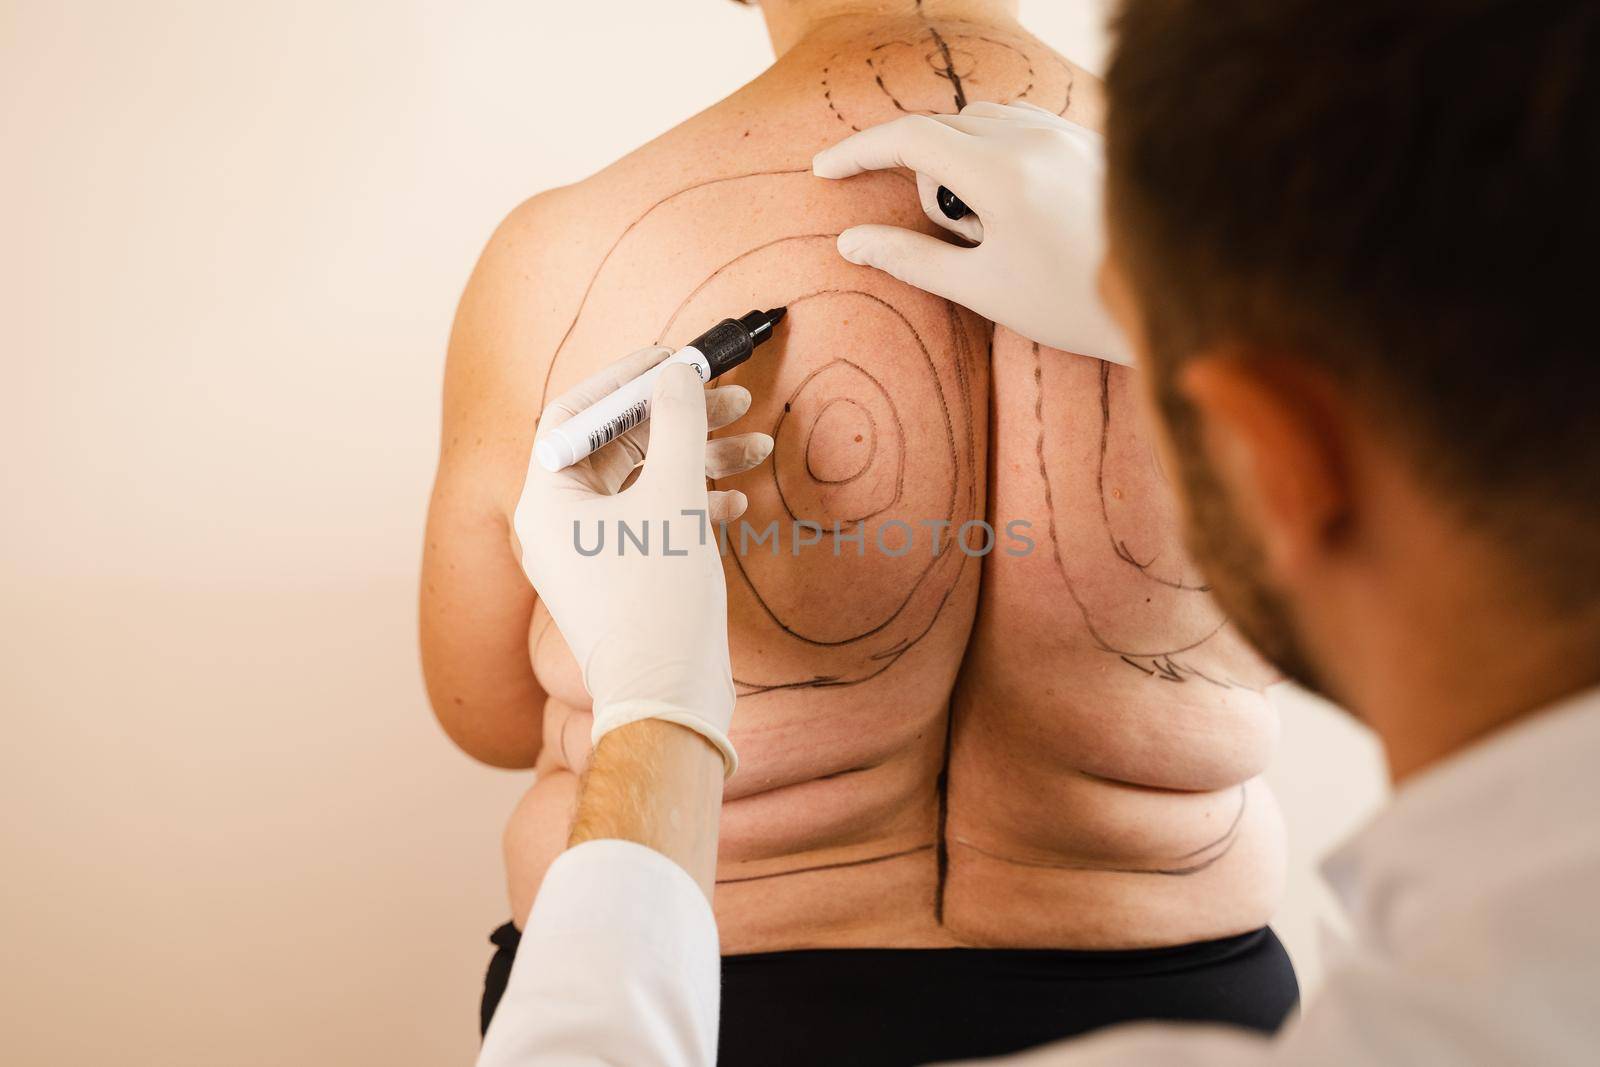 Markup for liposuction surgery. Kyphosis. Removing dowager hump. Obesity of woman